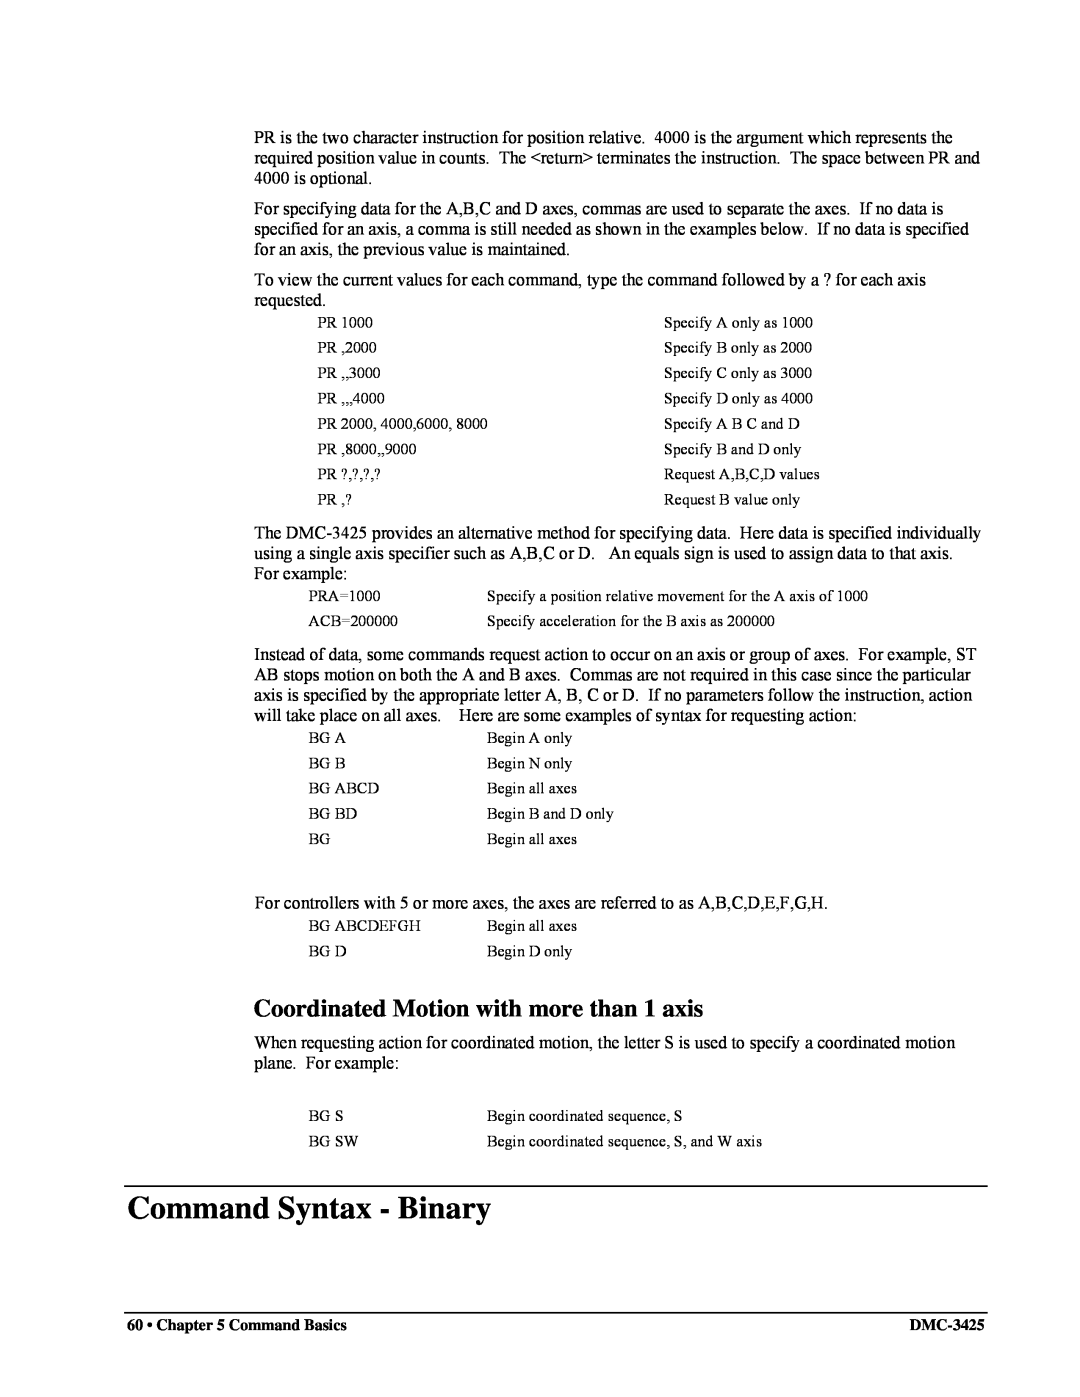 Galil DMC-3425 user manual Command Syntax - Binary, Coordinated Motion with more than 1 axis 